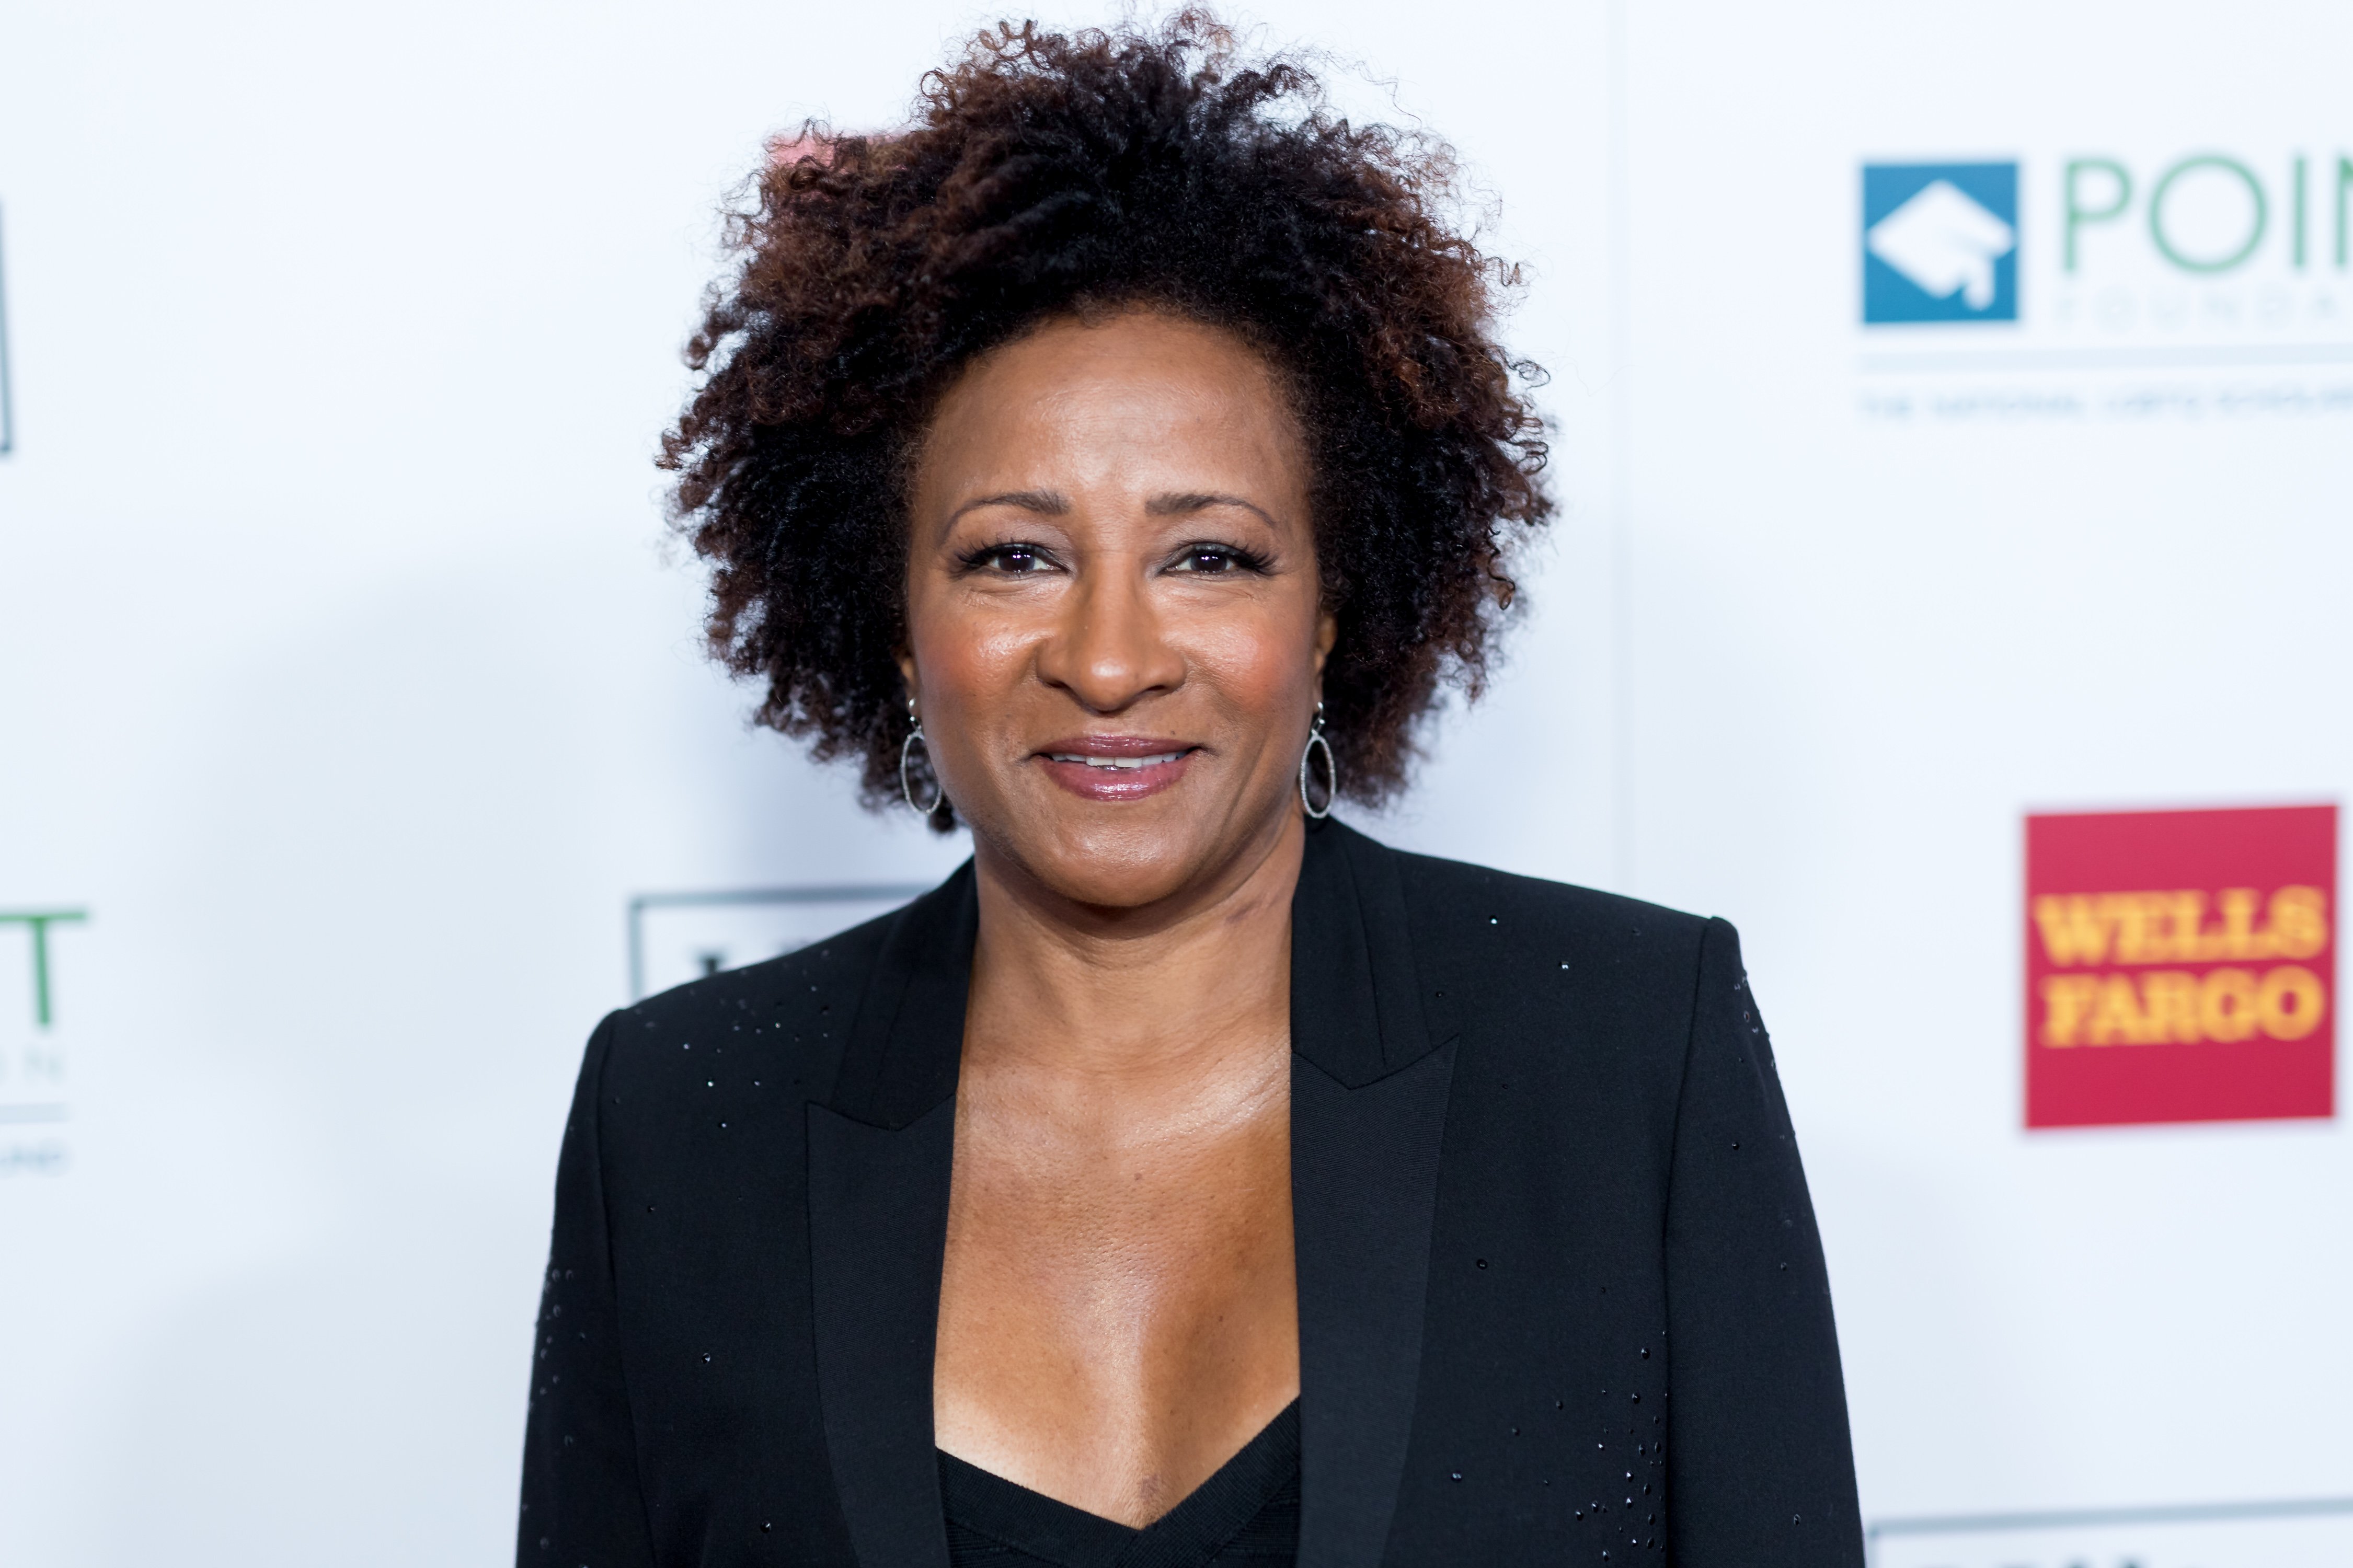 Wanda Sykes at The Beverly Hilton Hotel on October 7, 2017, in Beverly Hills, California. | Source: Getty Images